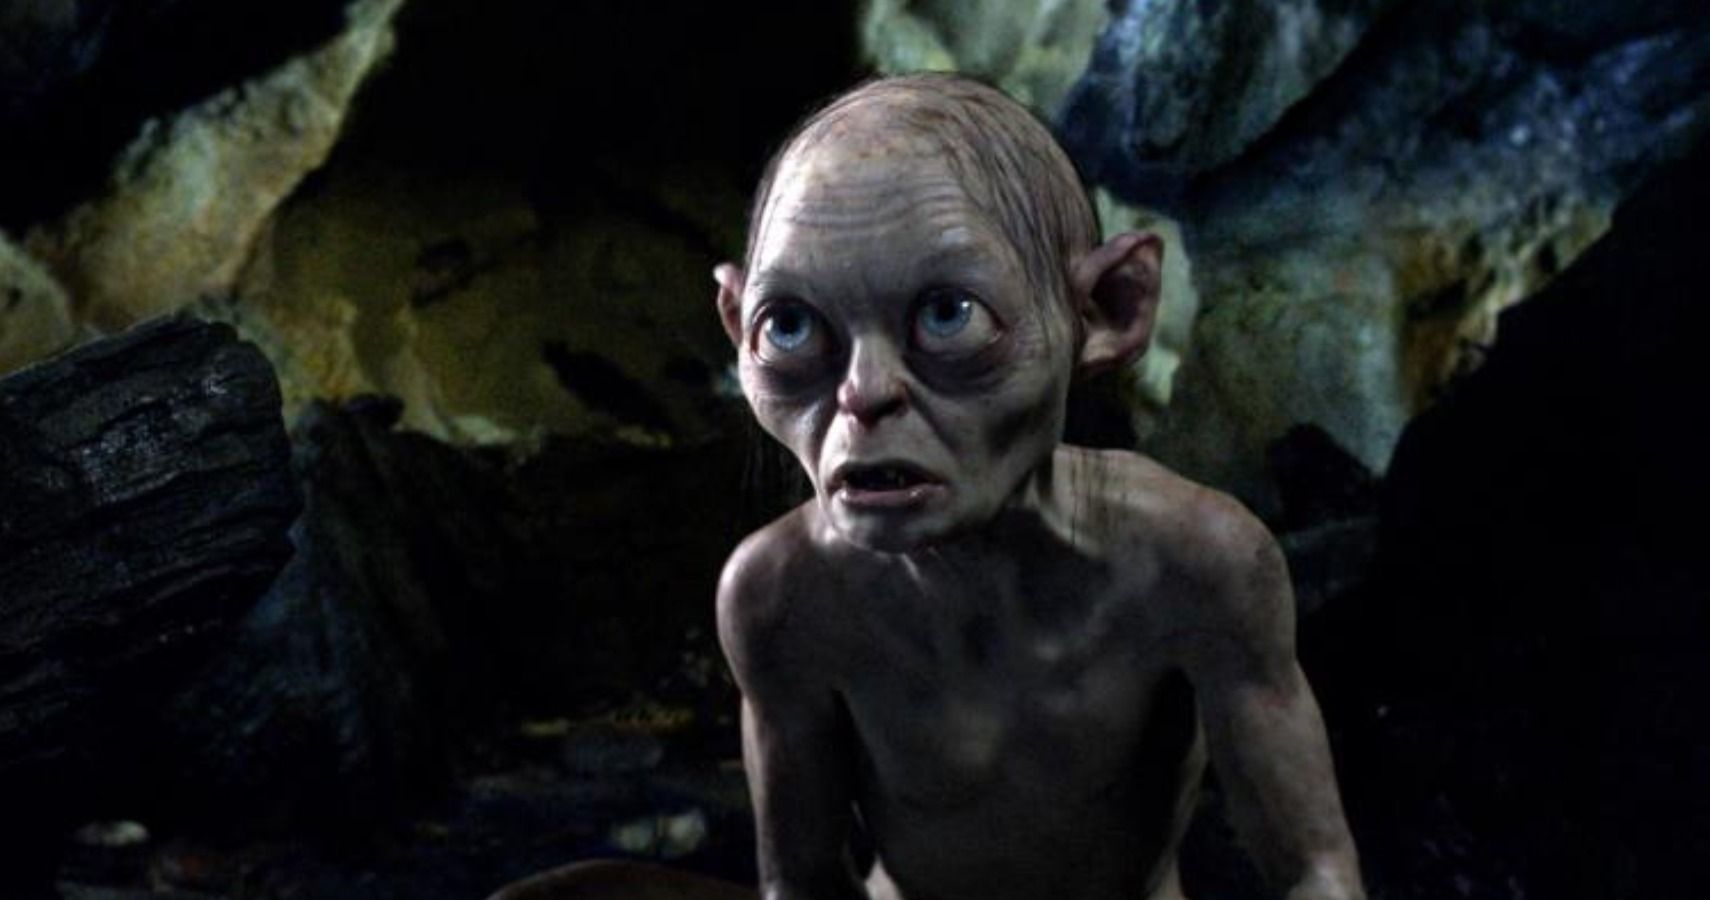 gollum from lord of the rings purpose